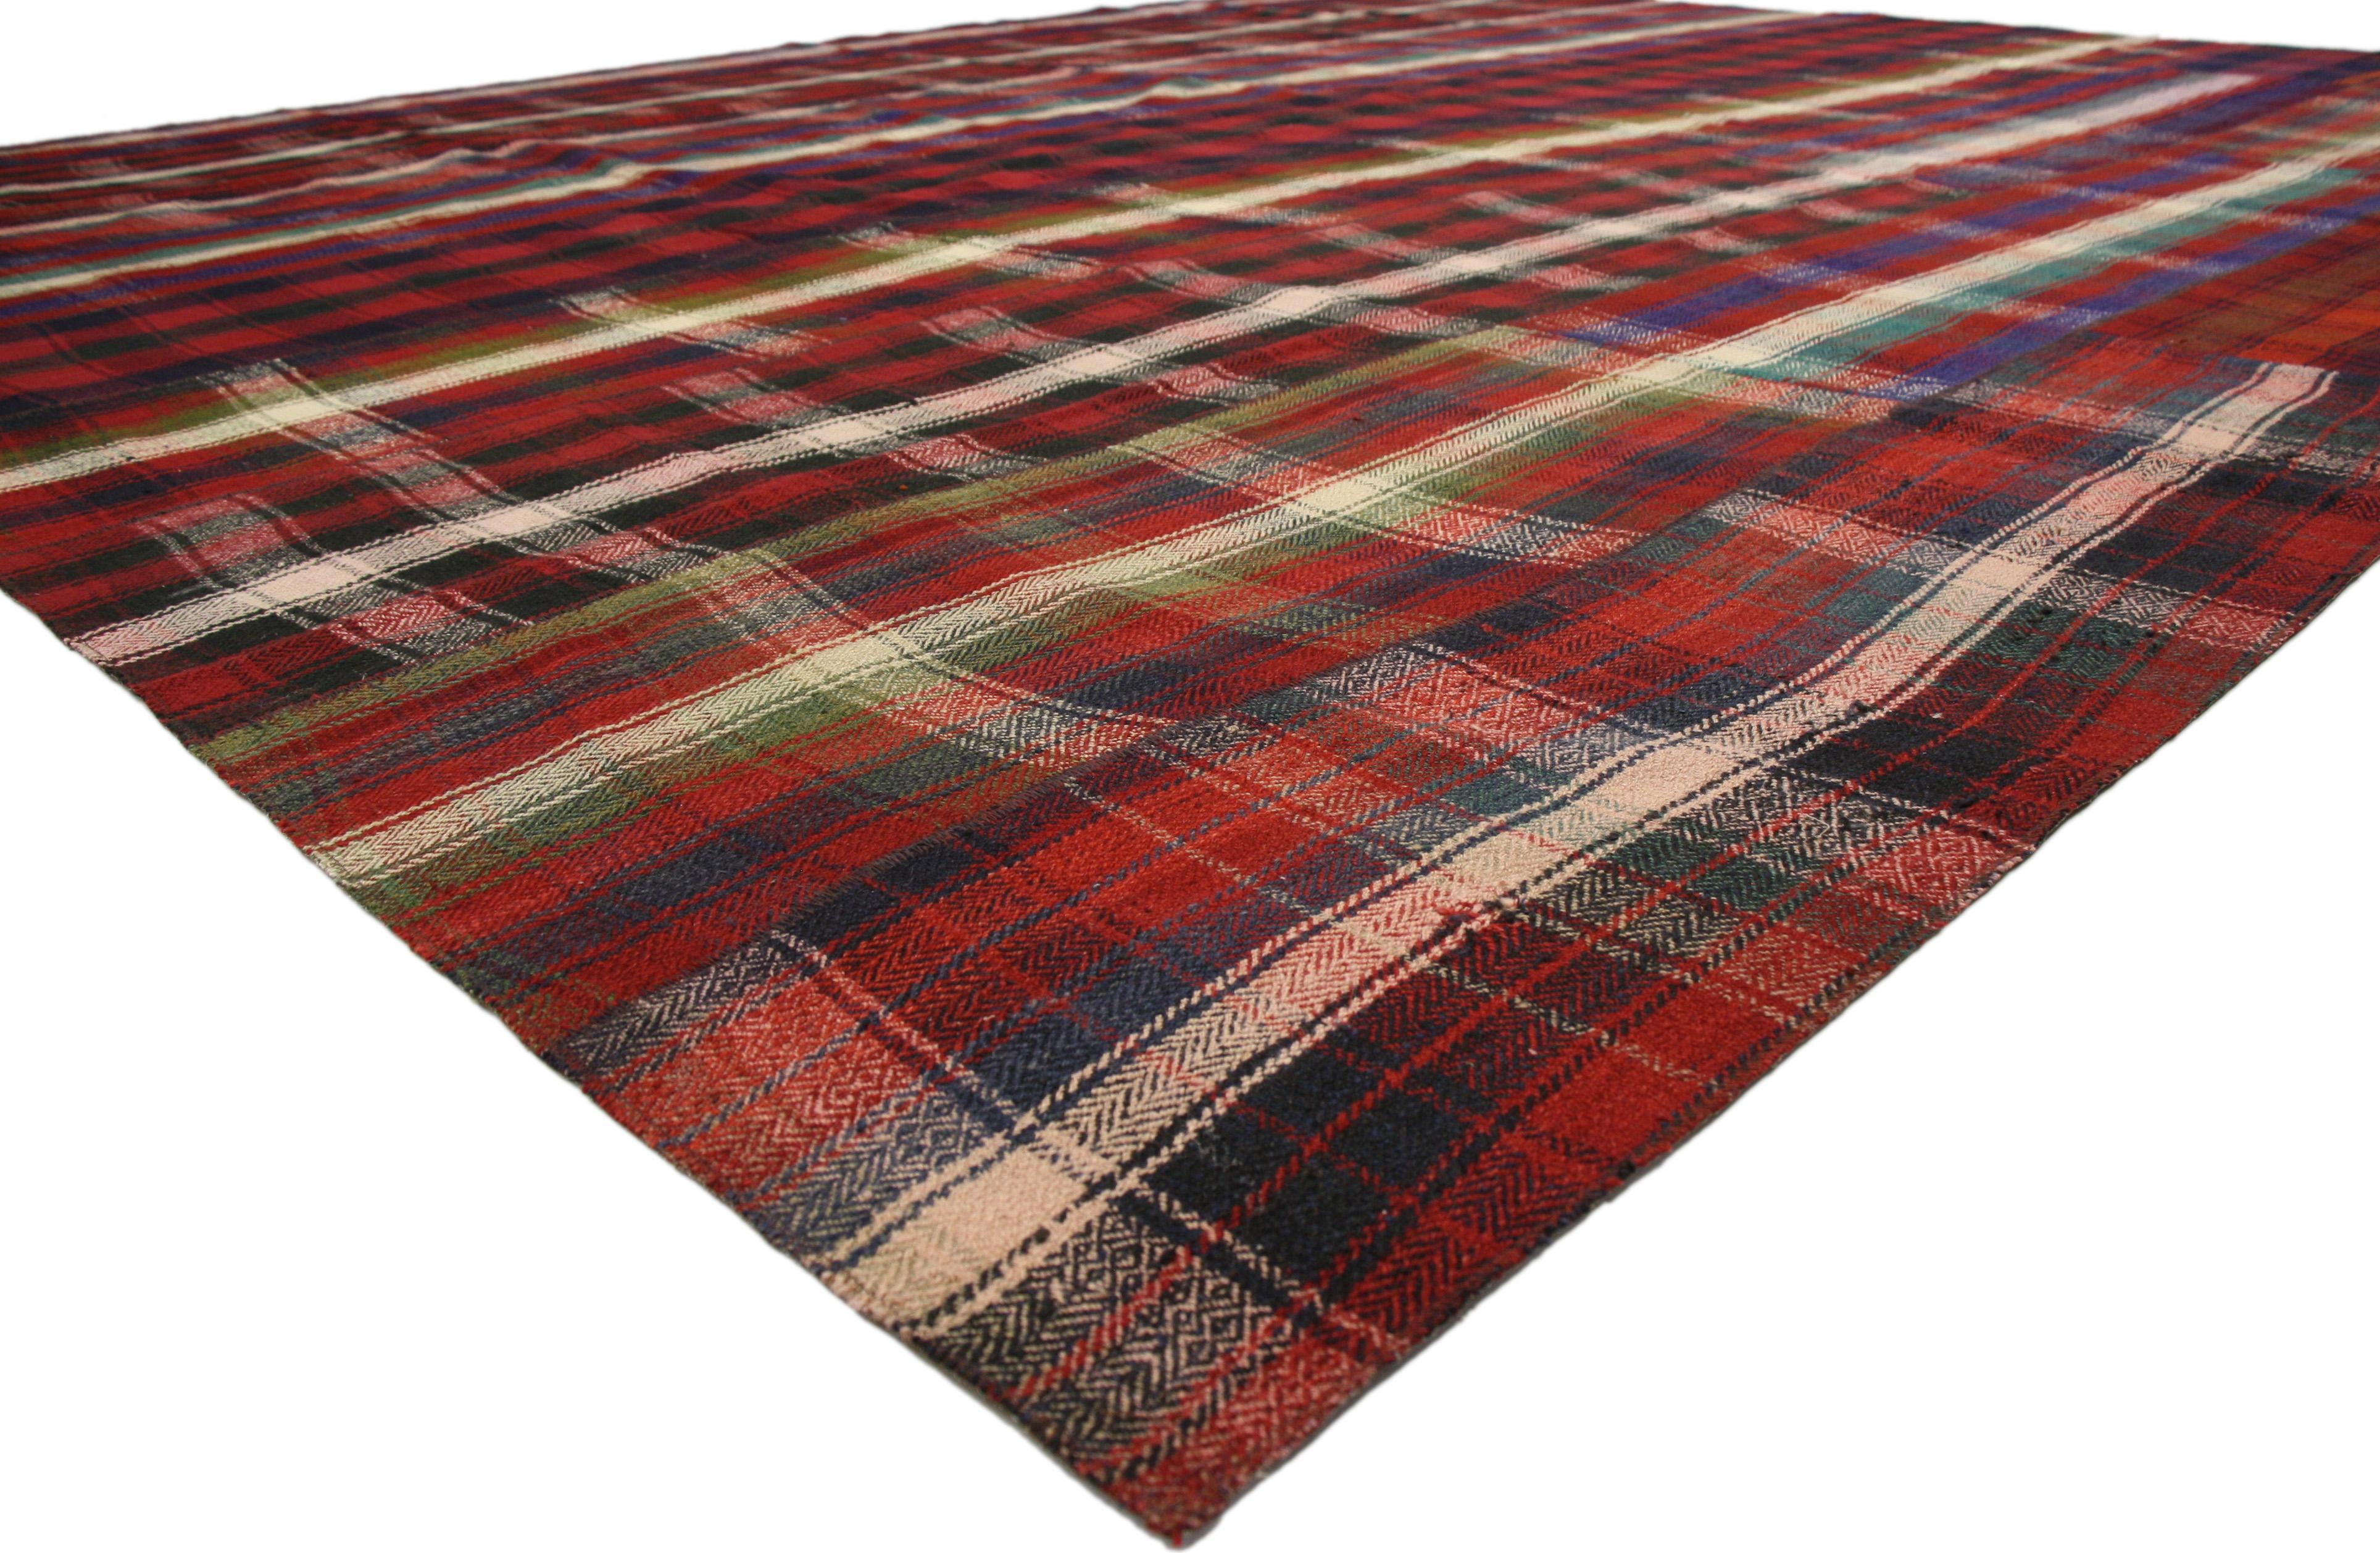 60814 Vintage Plaid Kilim Rug with Timeless Tartan Charm and Luxe Ralph Lauren Style. Warm and welcoming, conjure the feeling of modern rustic charm with this hand-woven wool vintage tartan plaid area rug. Masculine prep combined with timeless